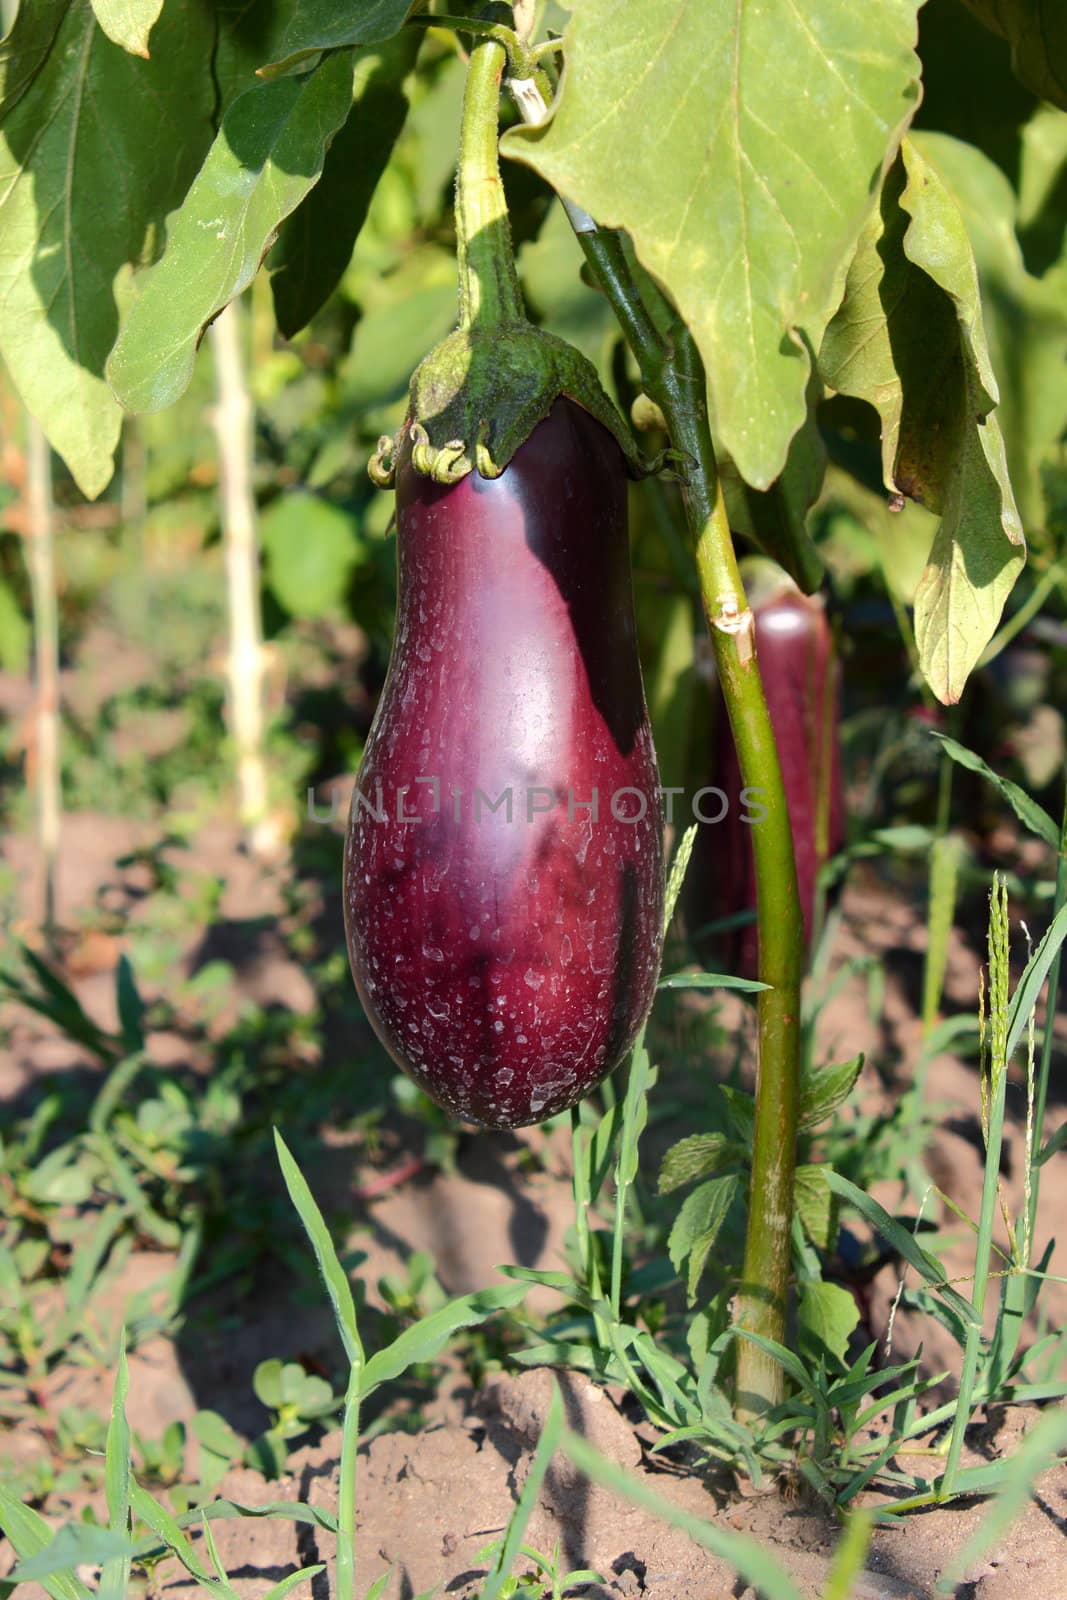 eggplants in the garden by taviphoto